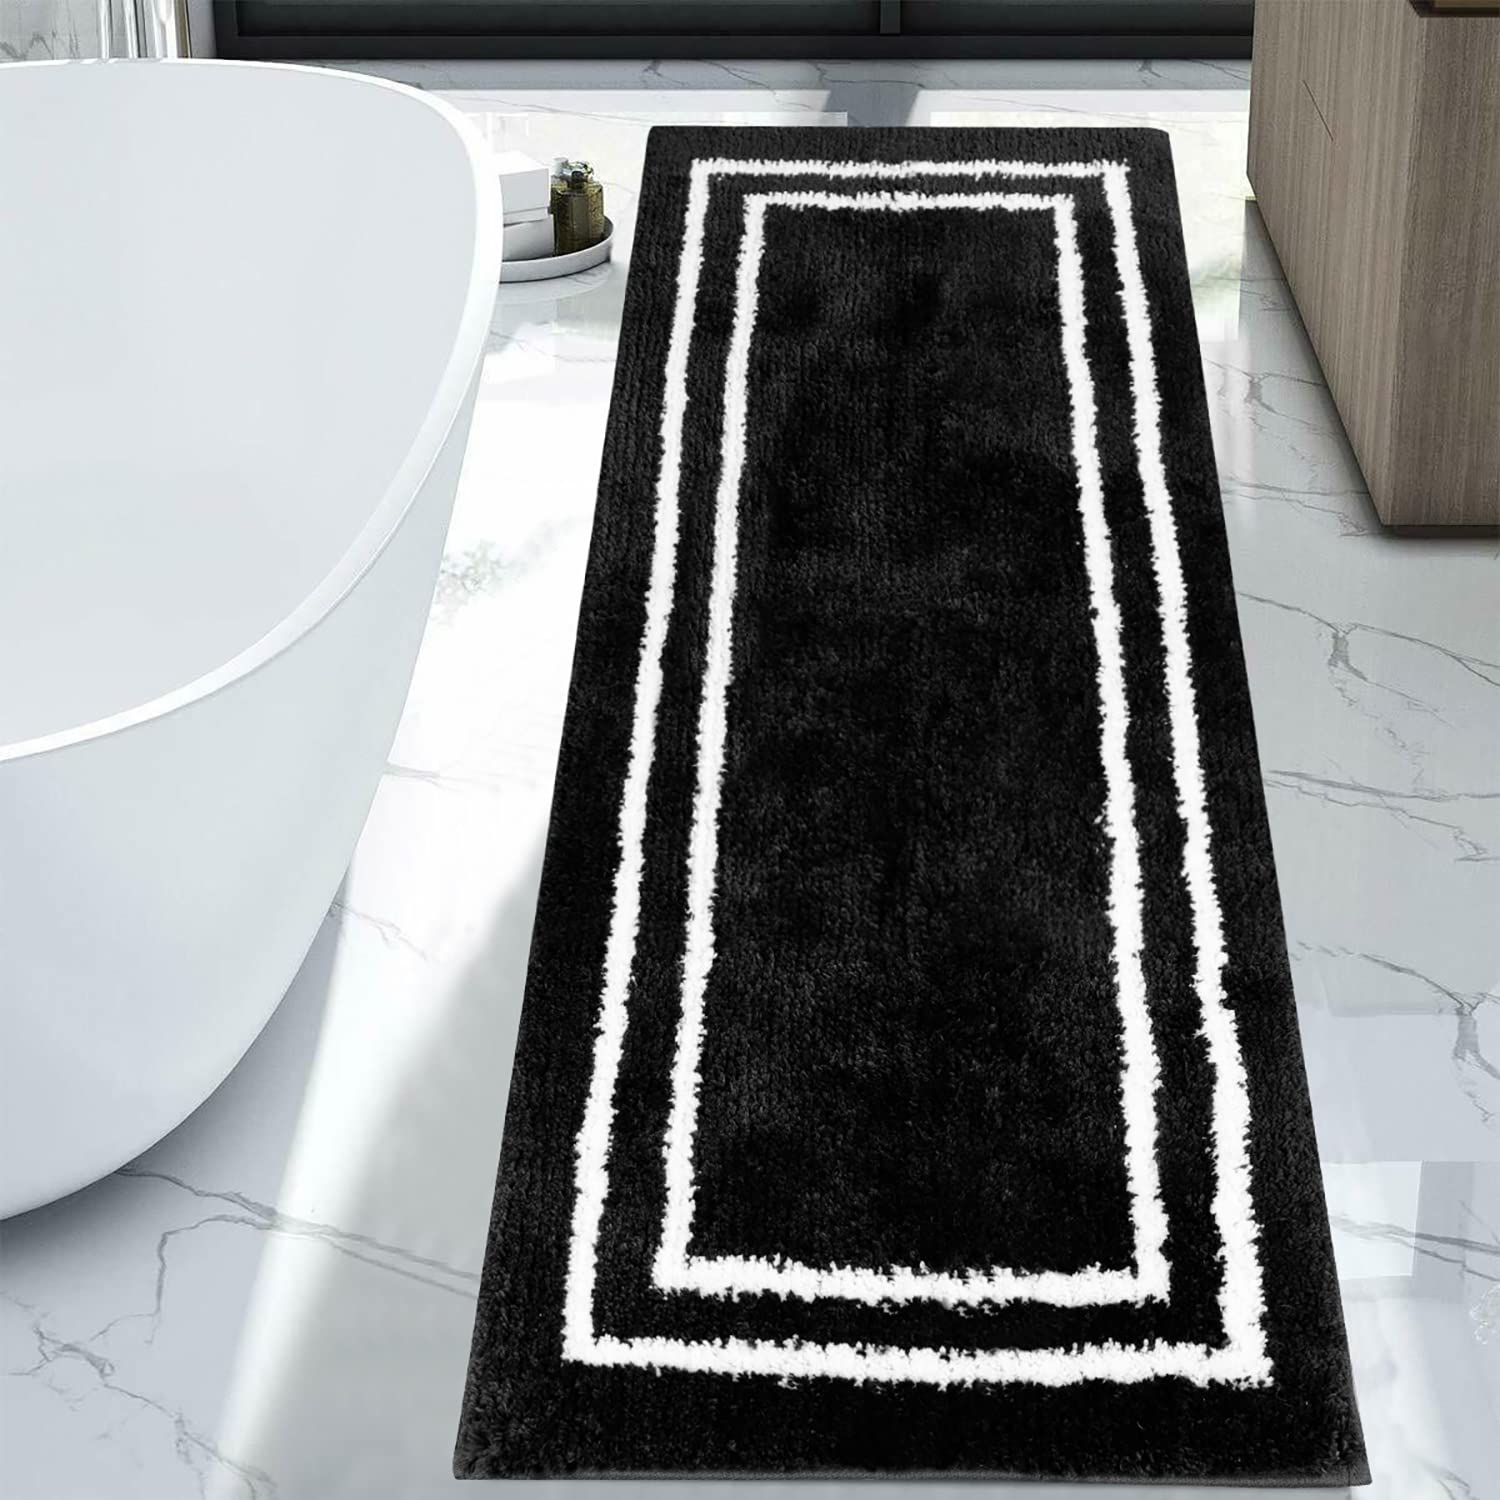 UpHome Uphome Bathroom Runner Navy Blue Non-Slip Extra Long Bathroom Rugs  Soft And Water Absorbent Bath Mat Machine Washable Fluffy Mic